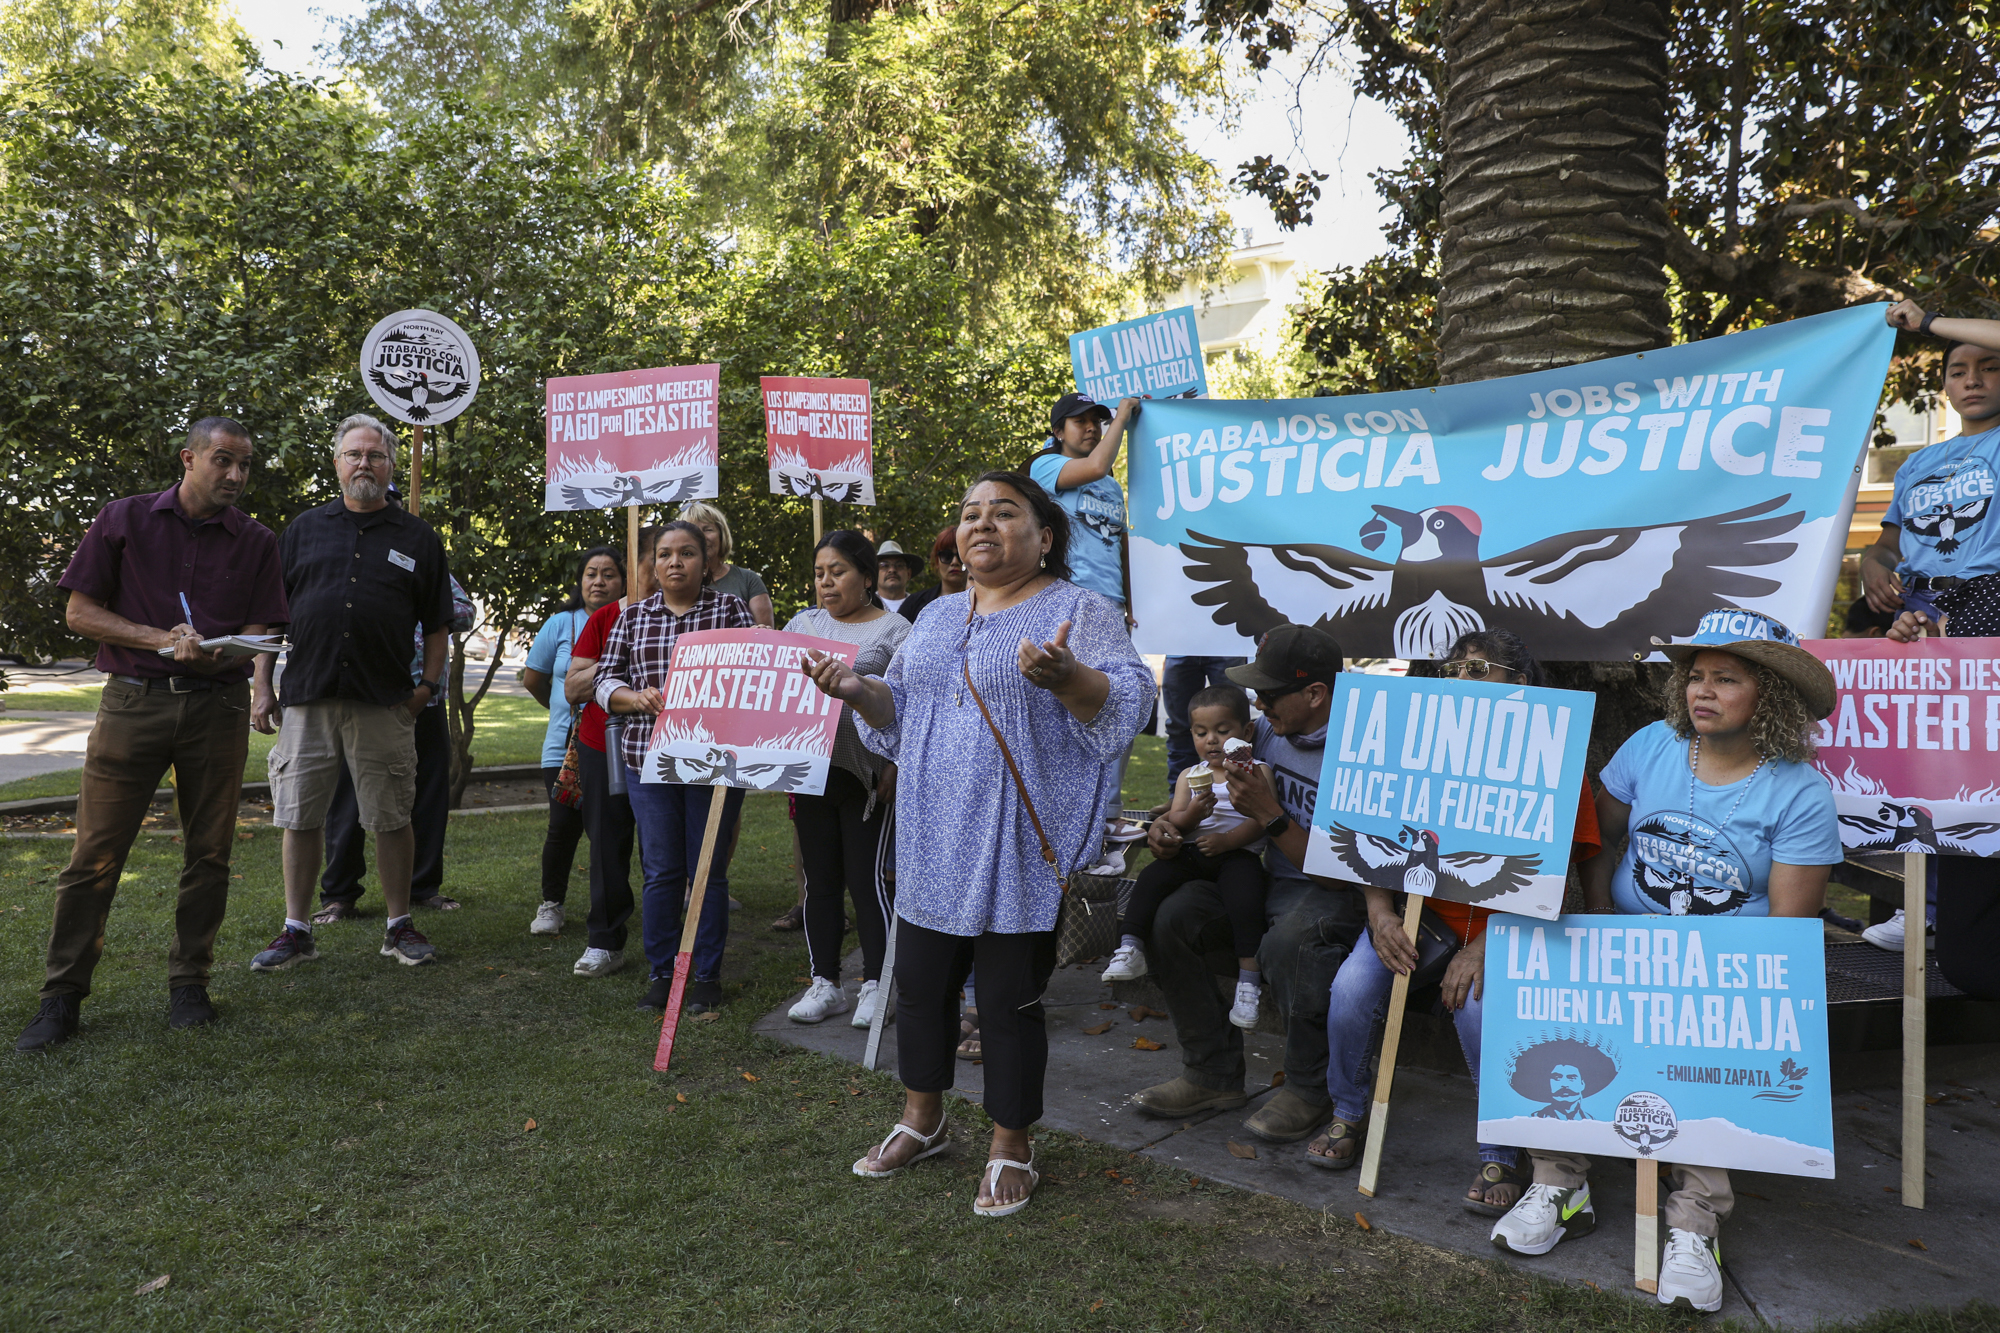 A person wearing earrings speaks in front of others holding signs reading "La Unión Hace la Fuerza" and "Farmworkers Deserve Disaster Pay" in an outdoor setting.